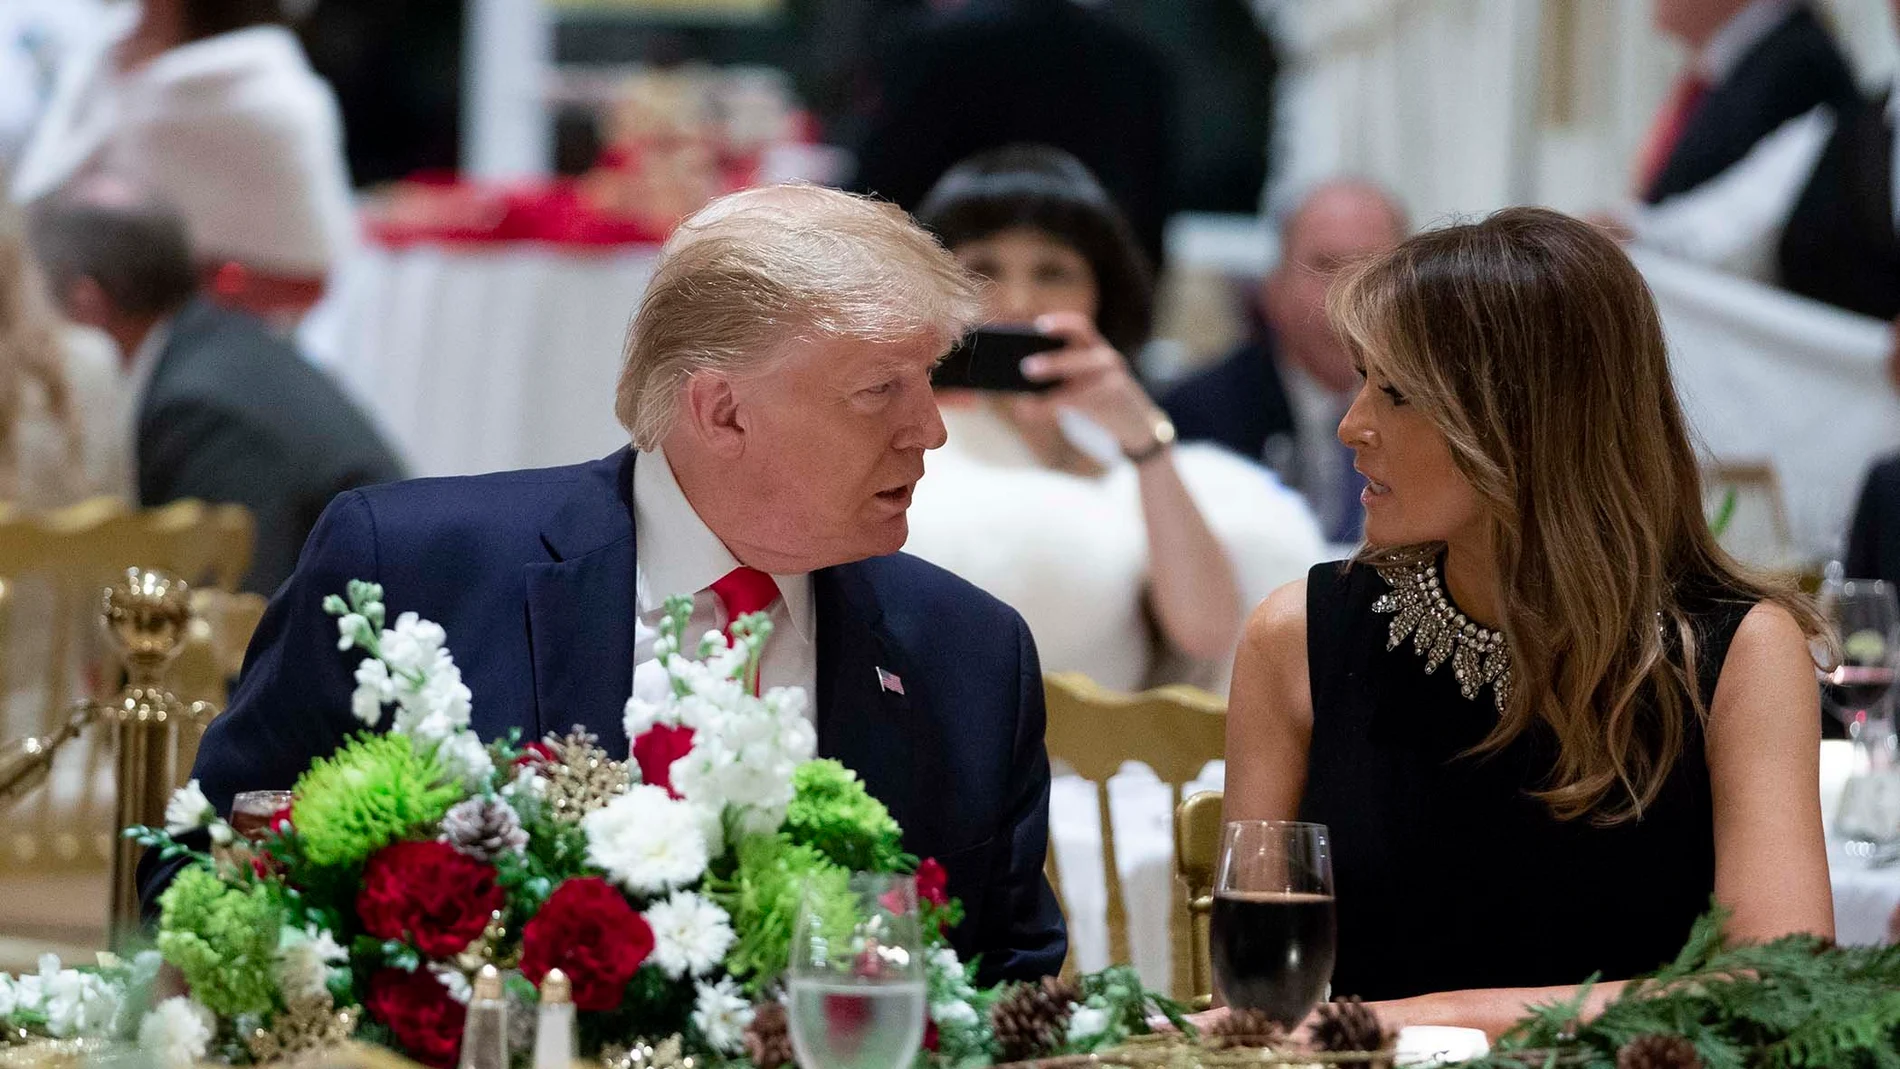 US President attends Christmas Eve dinner in Palm Beach